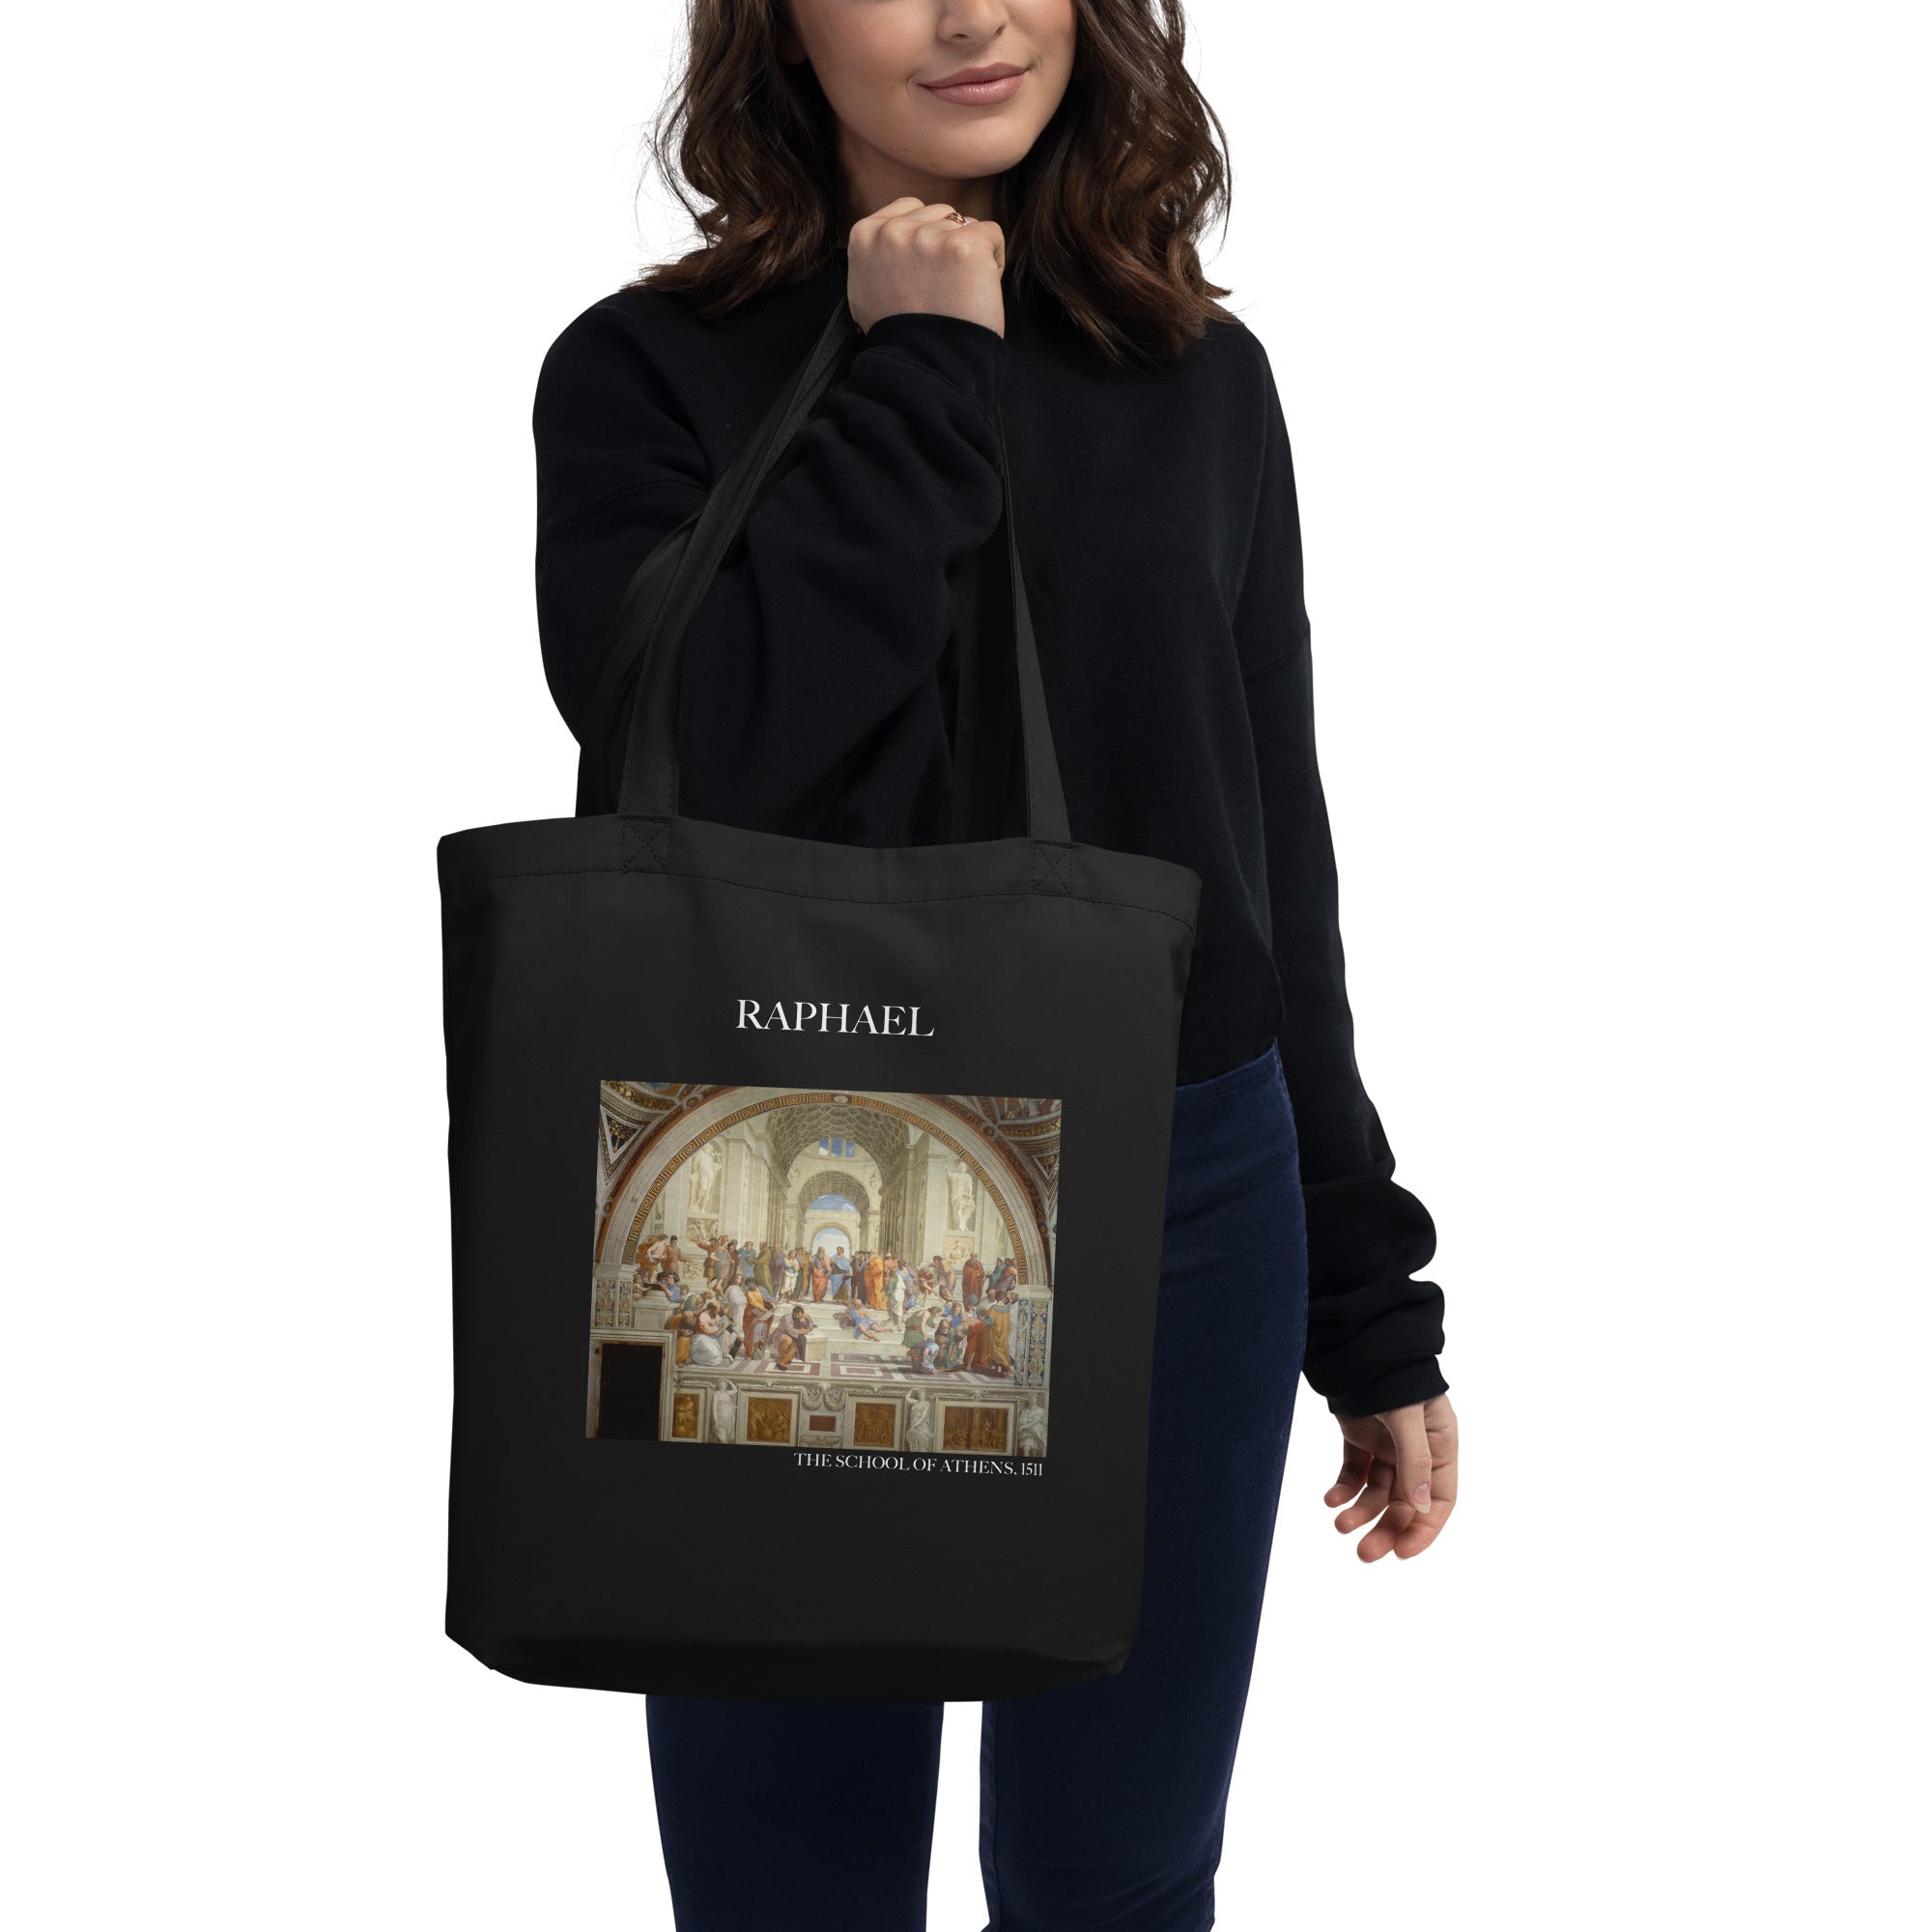 Raphael 'The School of Athens' Famous Painting Totebag | Eco Friendly Art Tote Bag